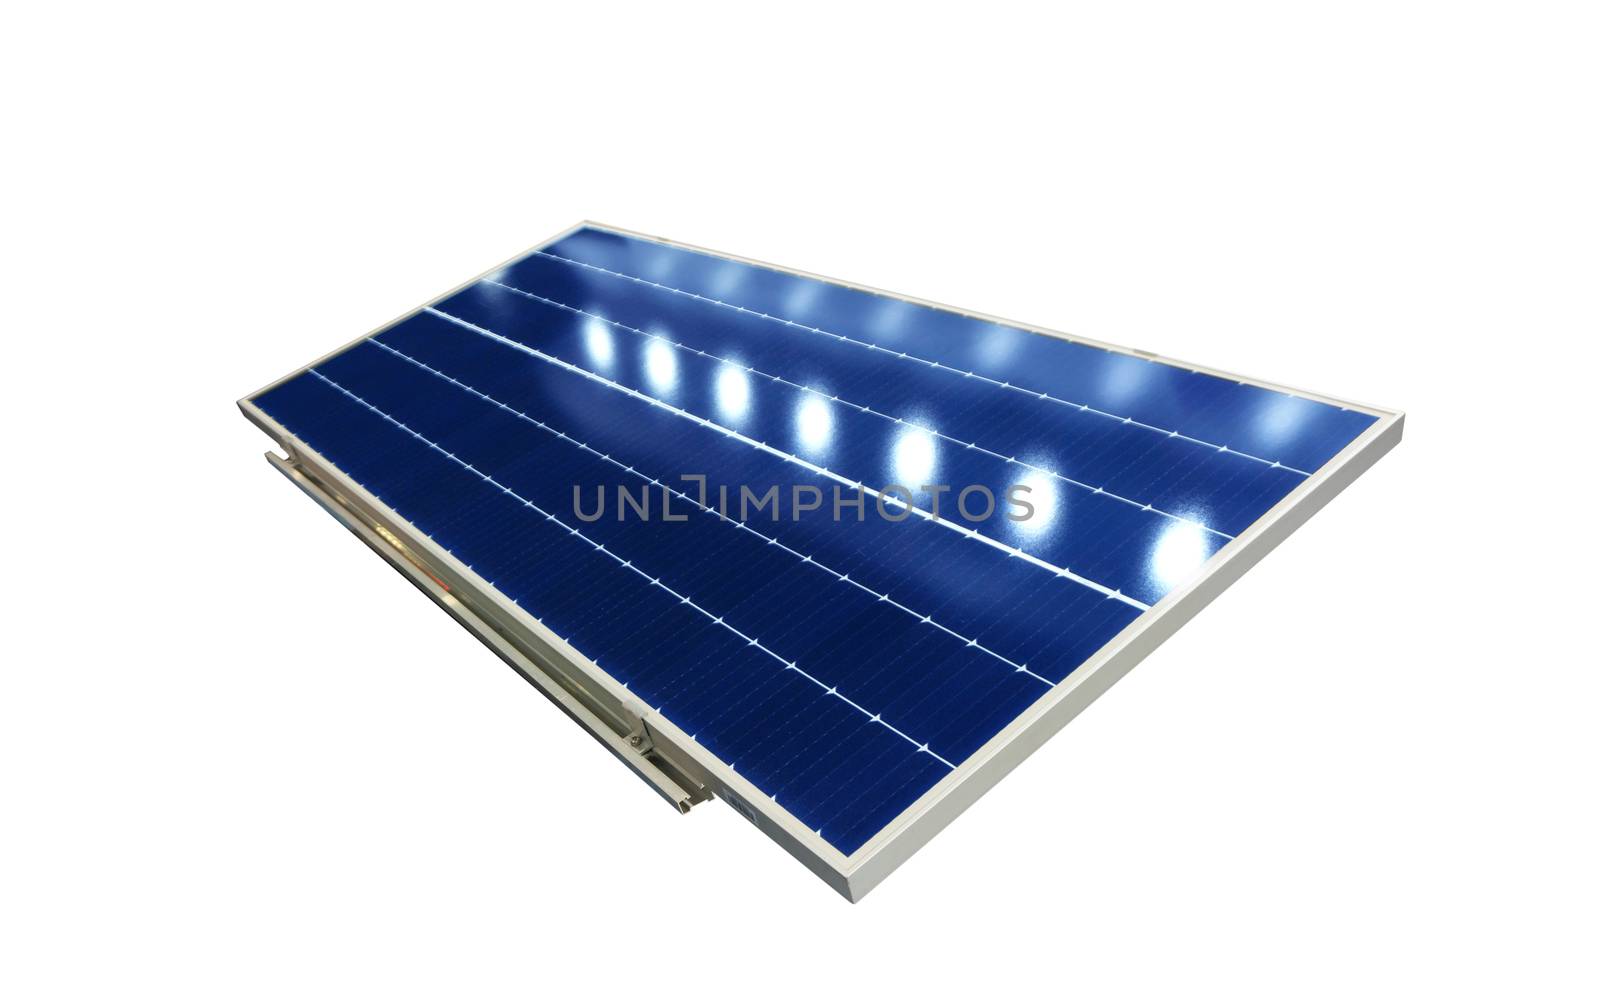 Photovoltaic solar panels absorb sunlight as a source of energy to generate direct current electricity. 